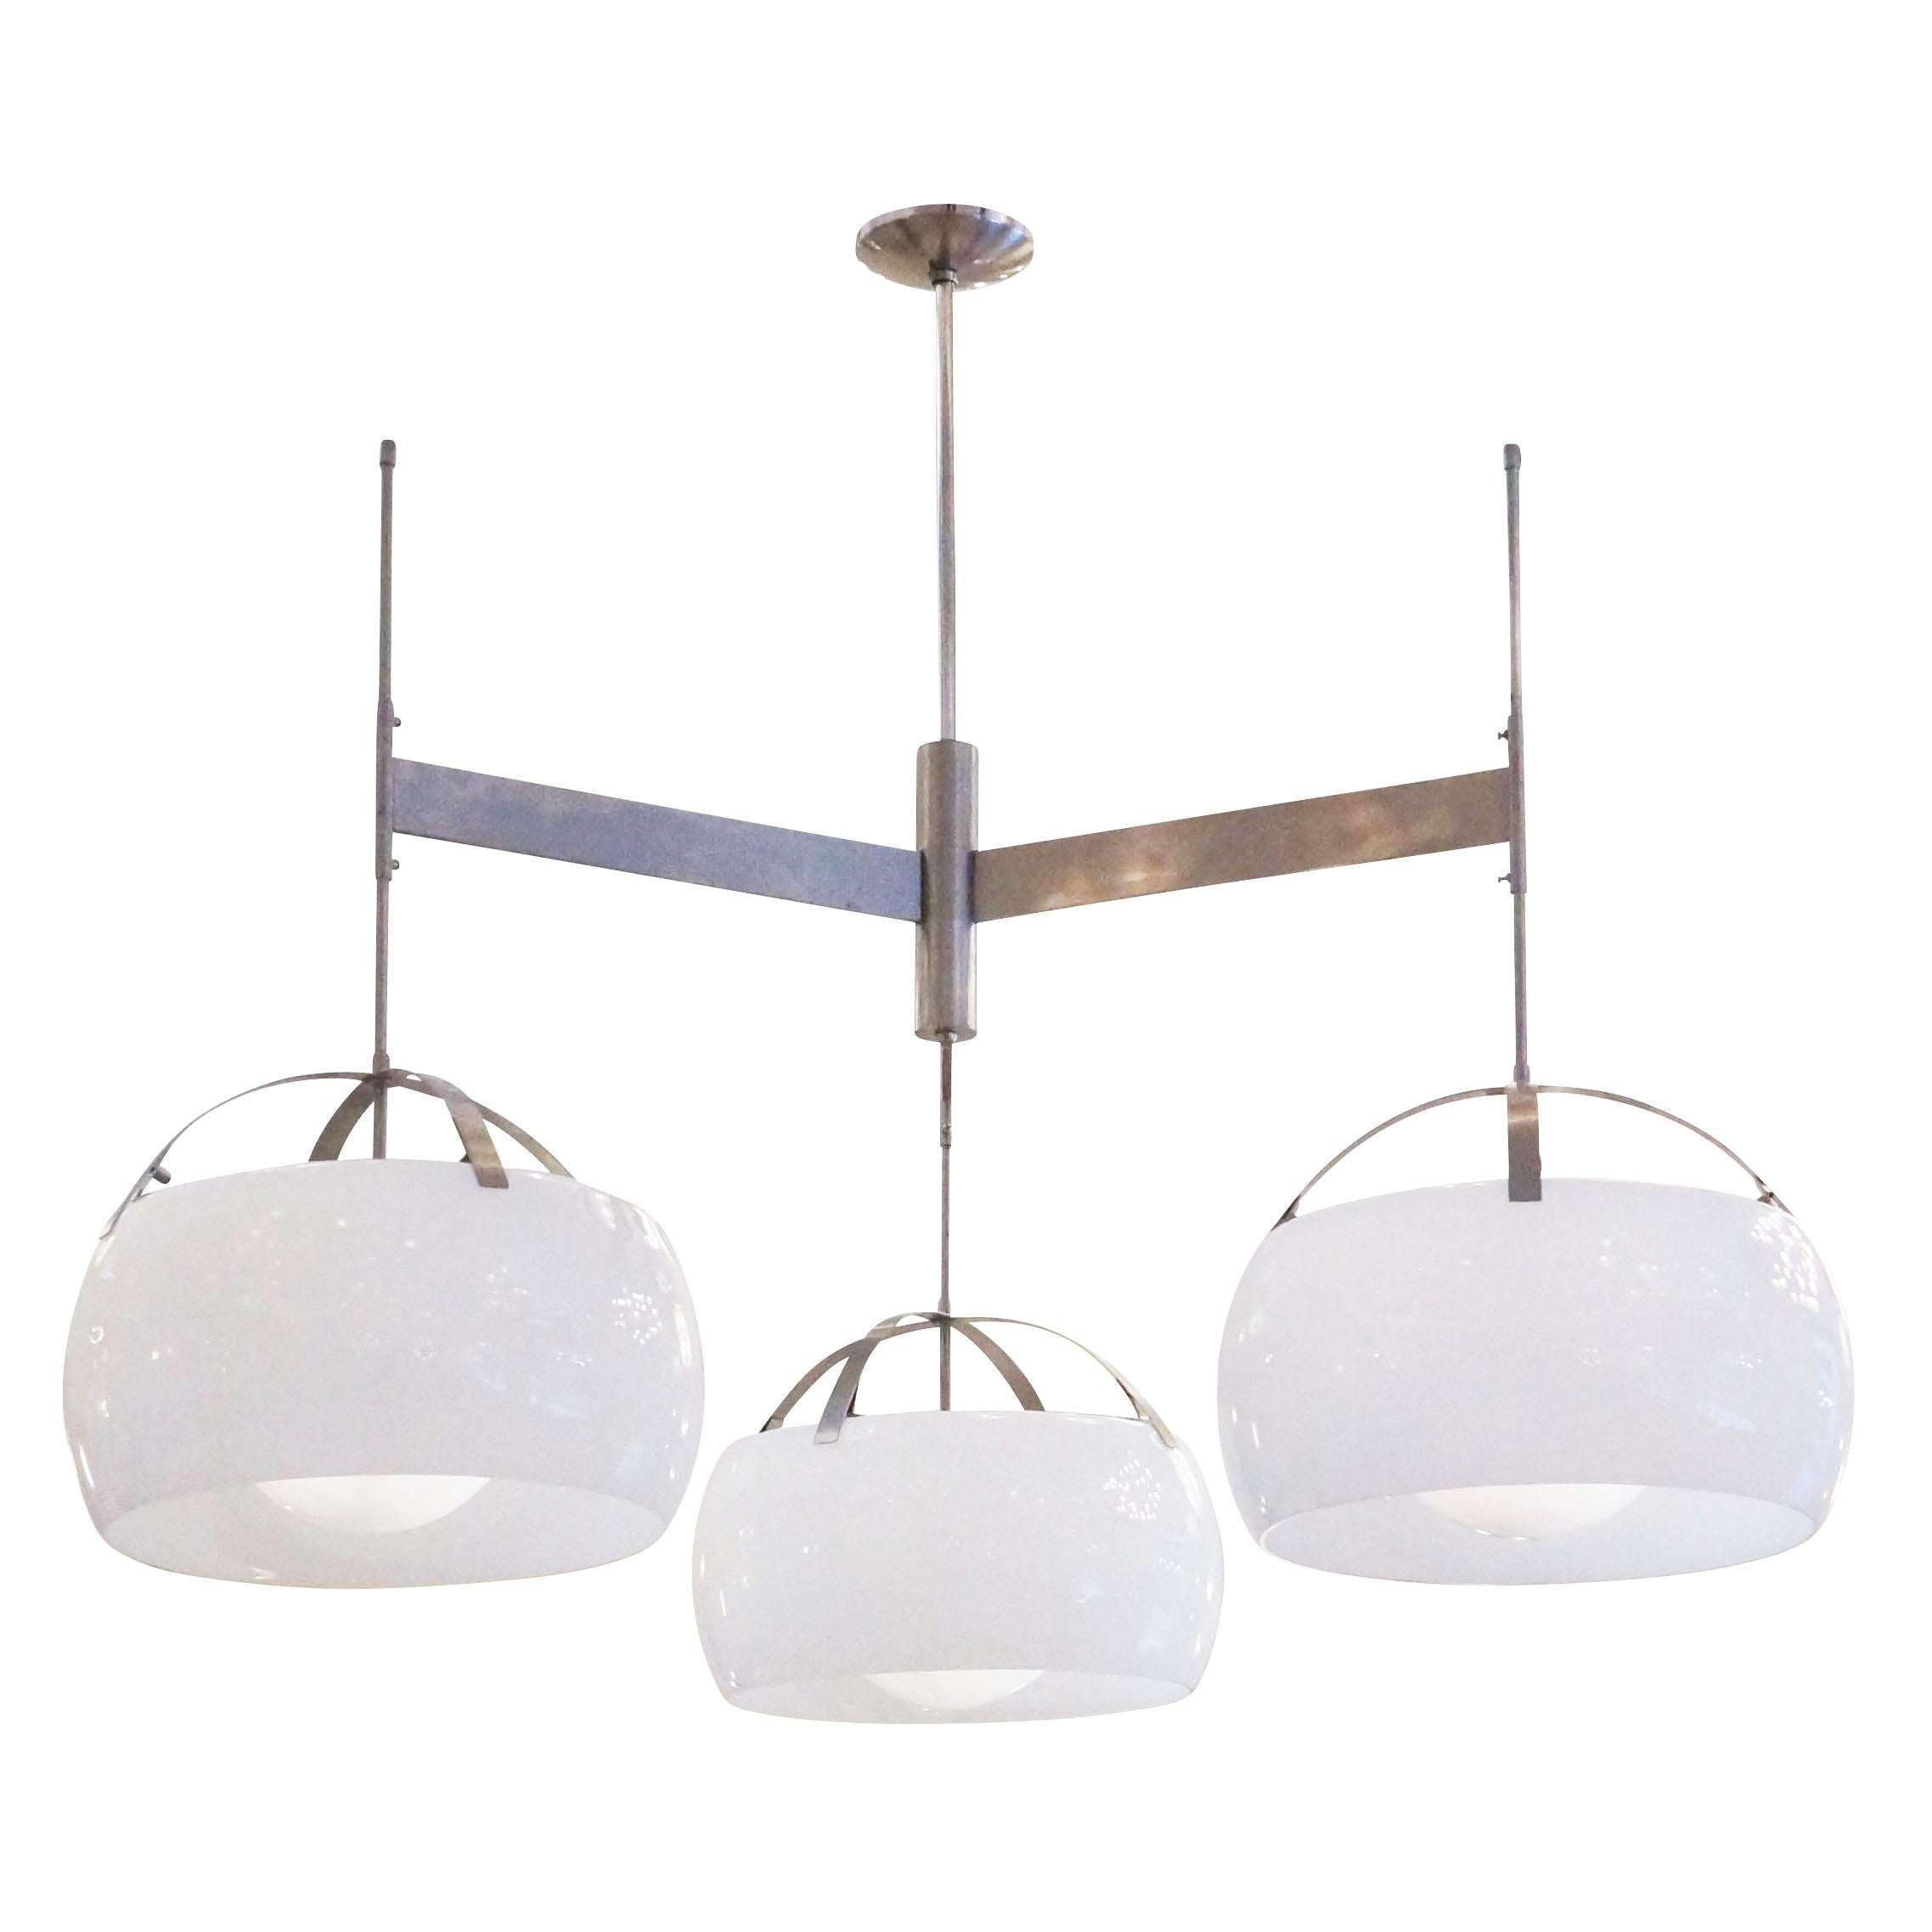 Three-light adjustable chandelier designed by Vico Magistretti for Artemide in 1961. Each satin nickel arm ends in a round glass shade covered by a secondary 